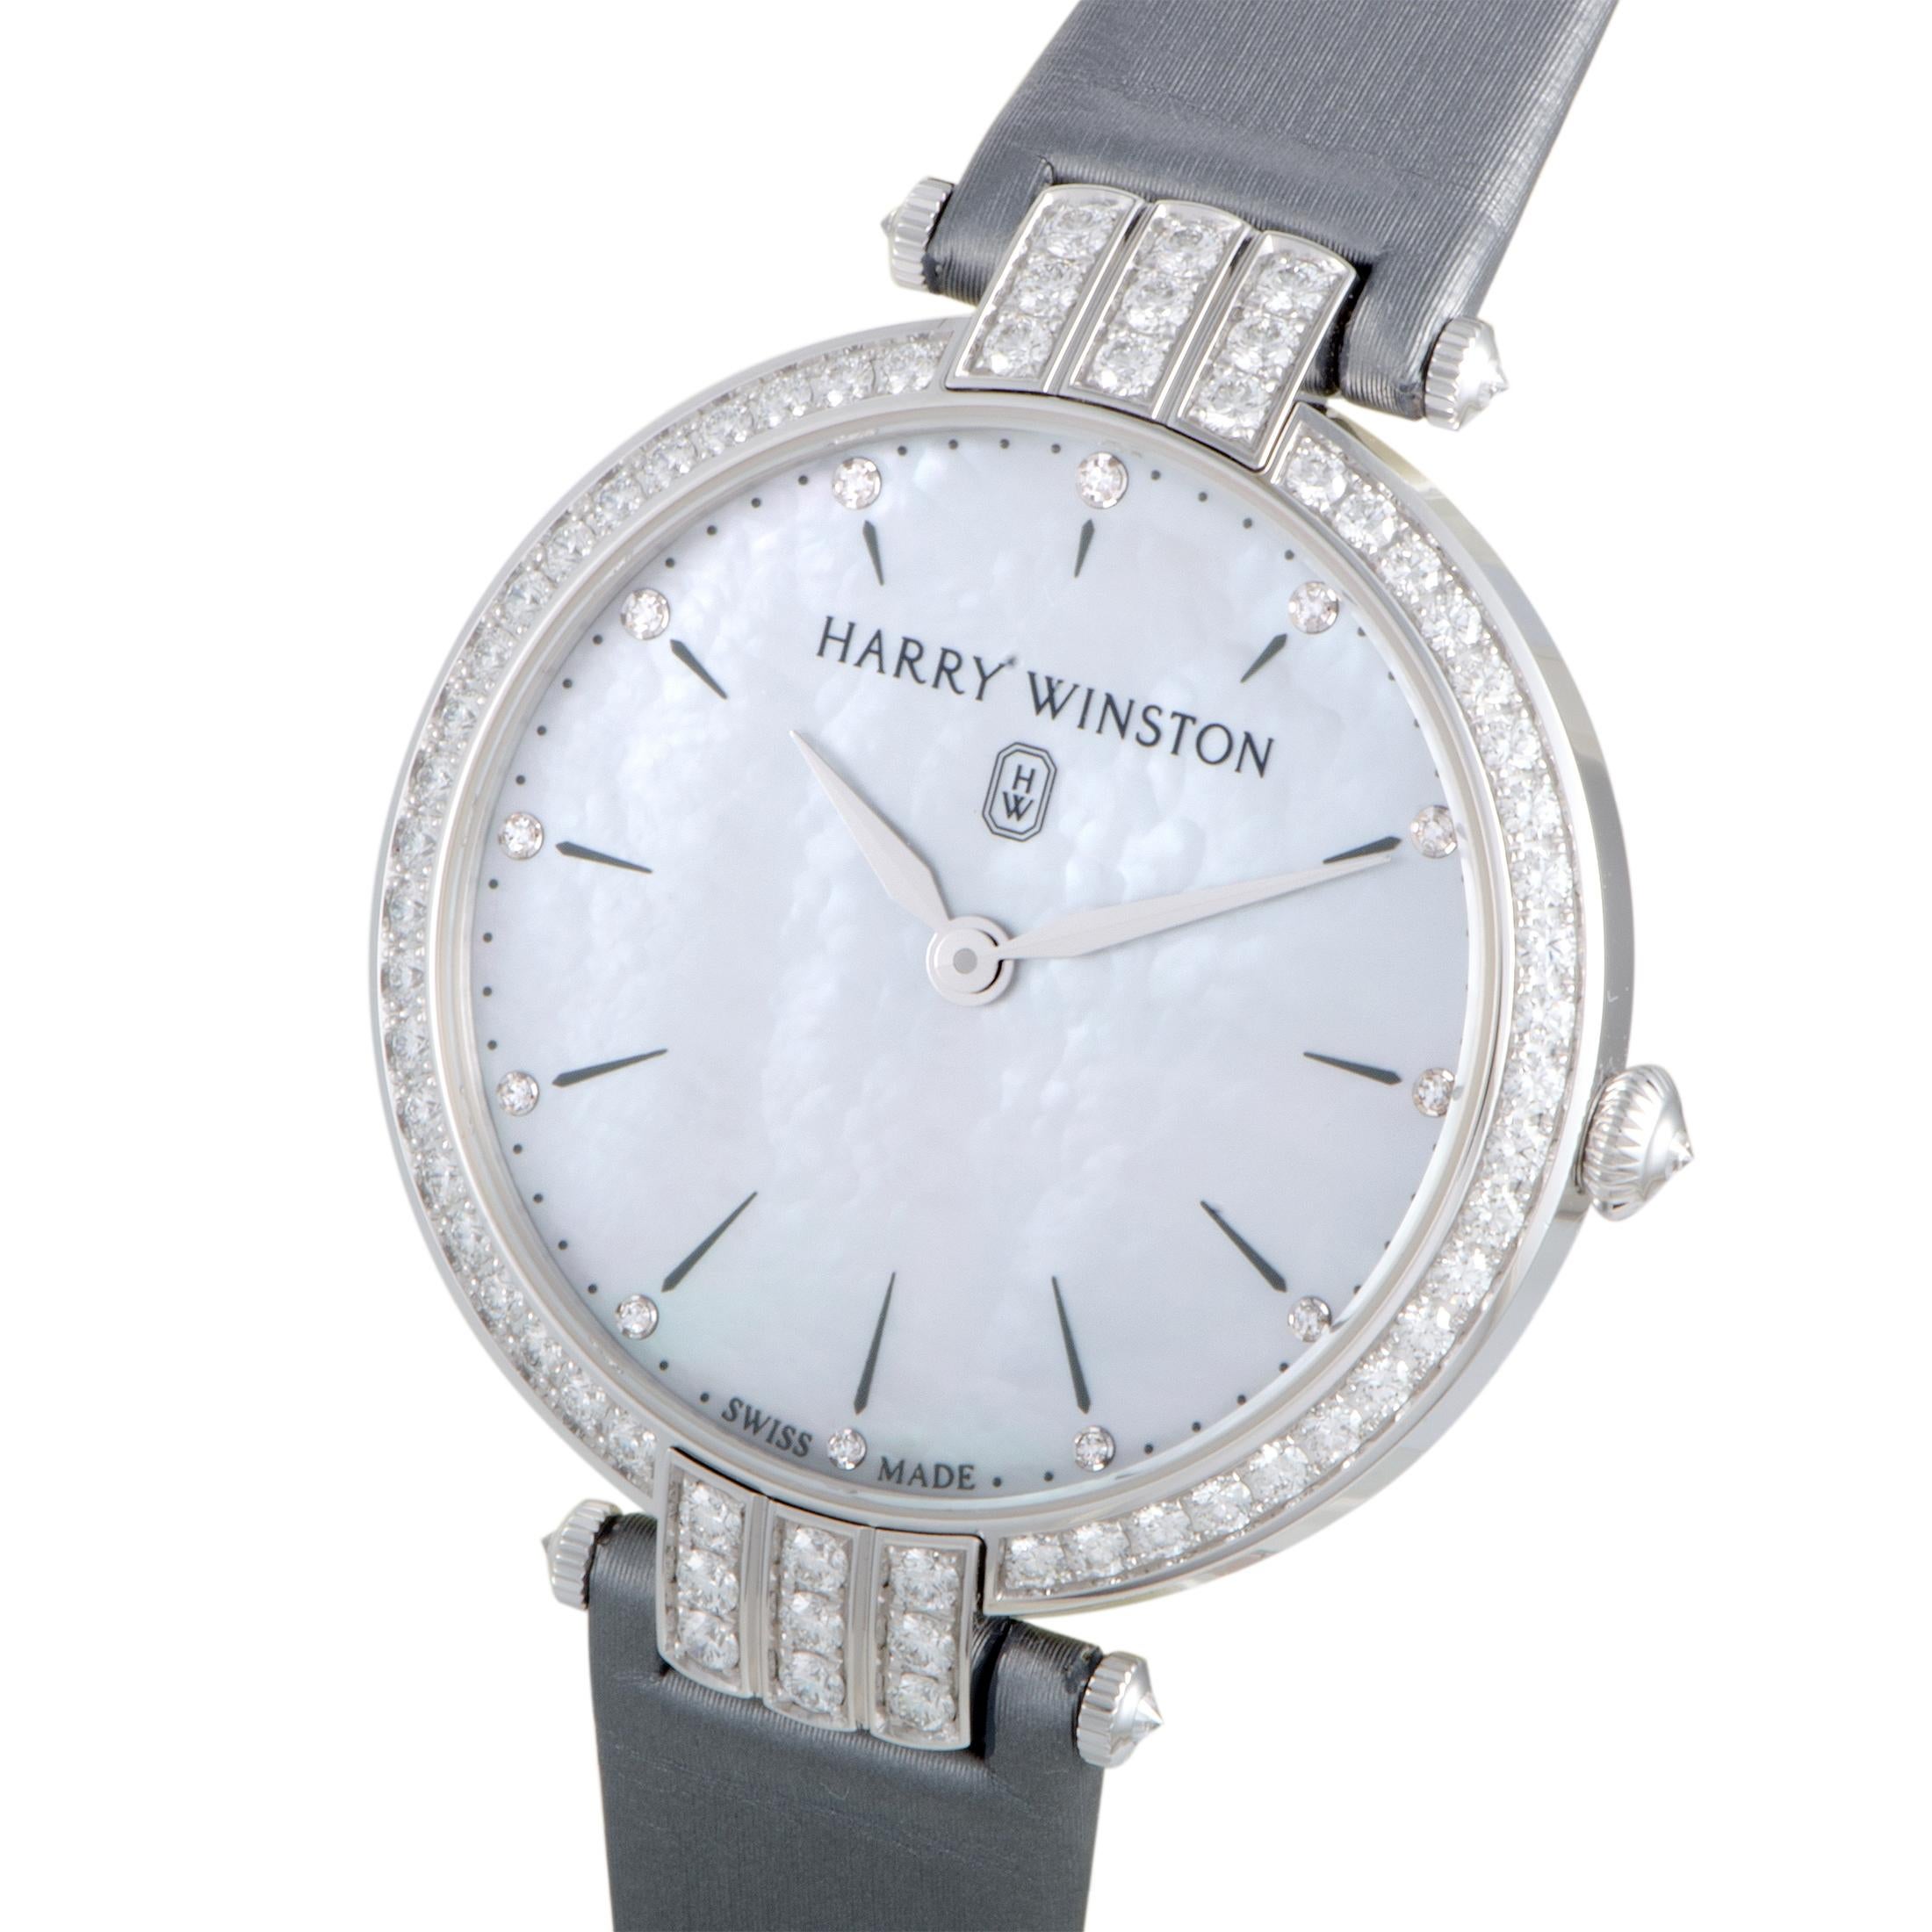 Tastefully complementing the enticing resplendence and charming allure of diamonds with its scintillating presence and delightful tenderness, the gorgeous mother of pearl perfectly completes the spellbinding appearance of this sumptuous timepiece